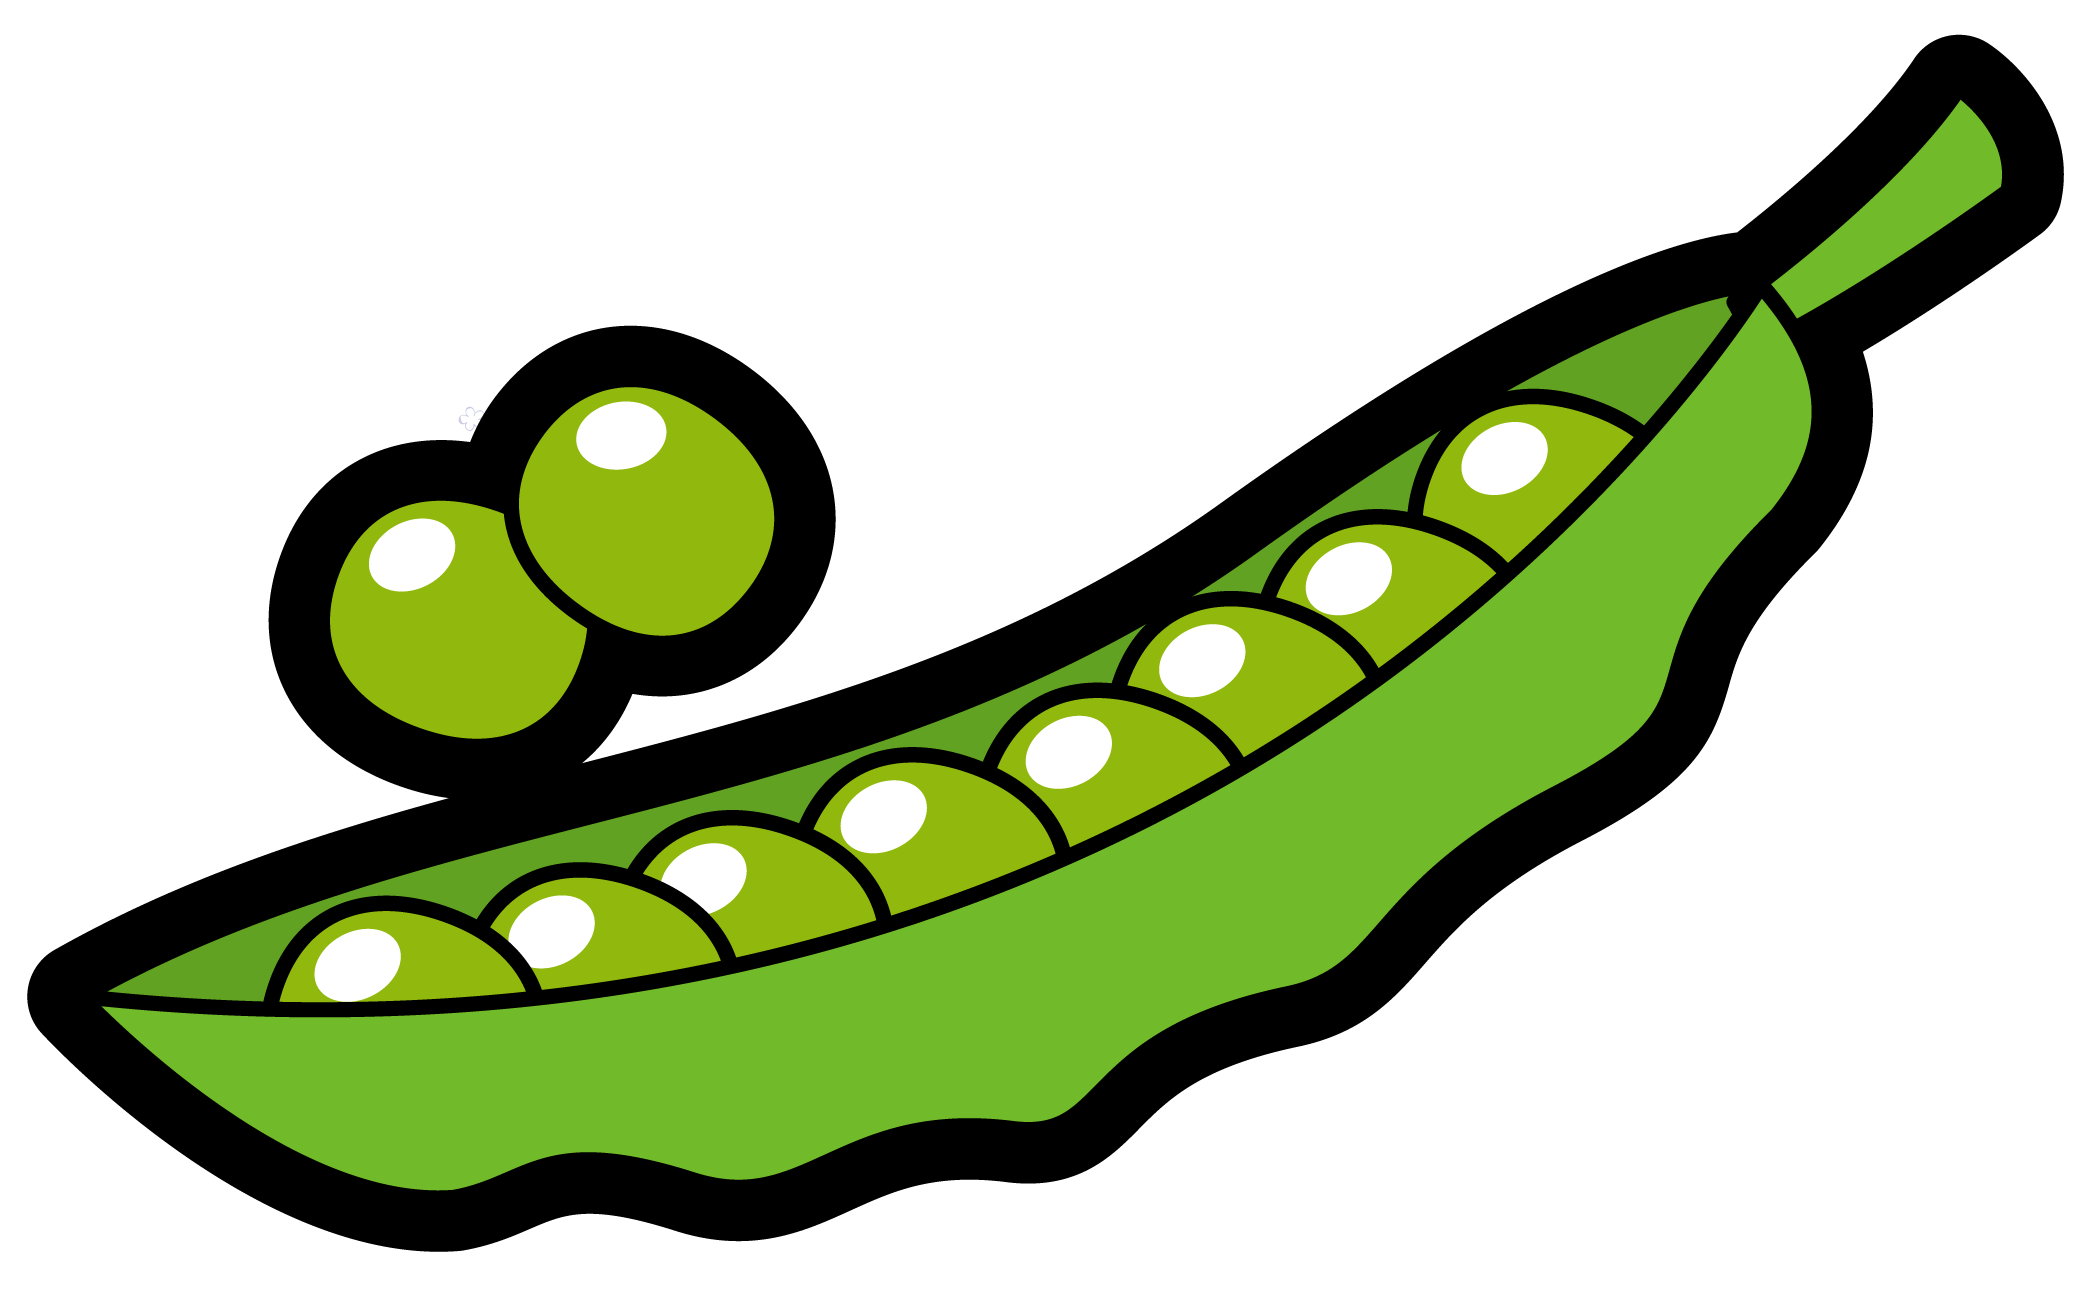 Beans clipart pea, Beans pea Transparent FREE for download